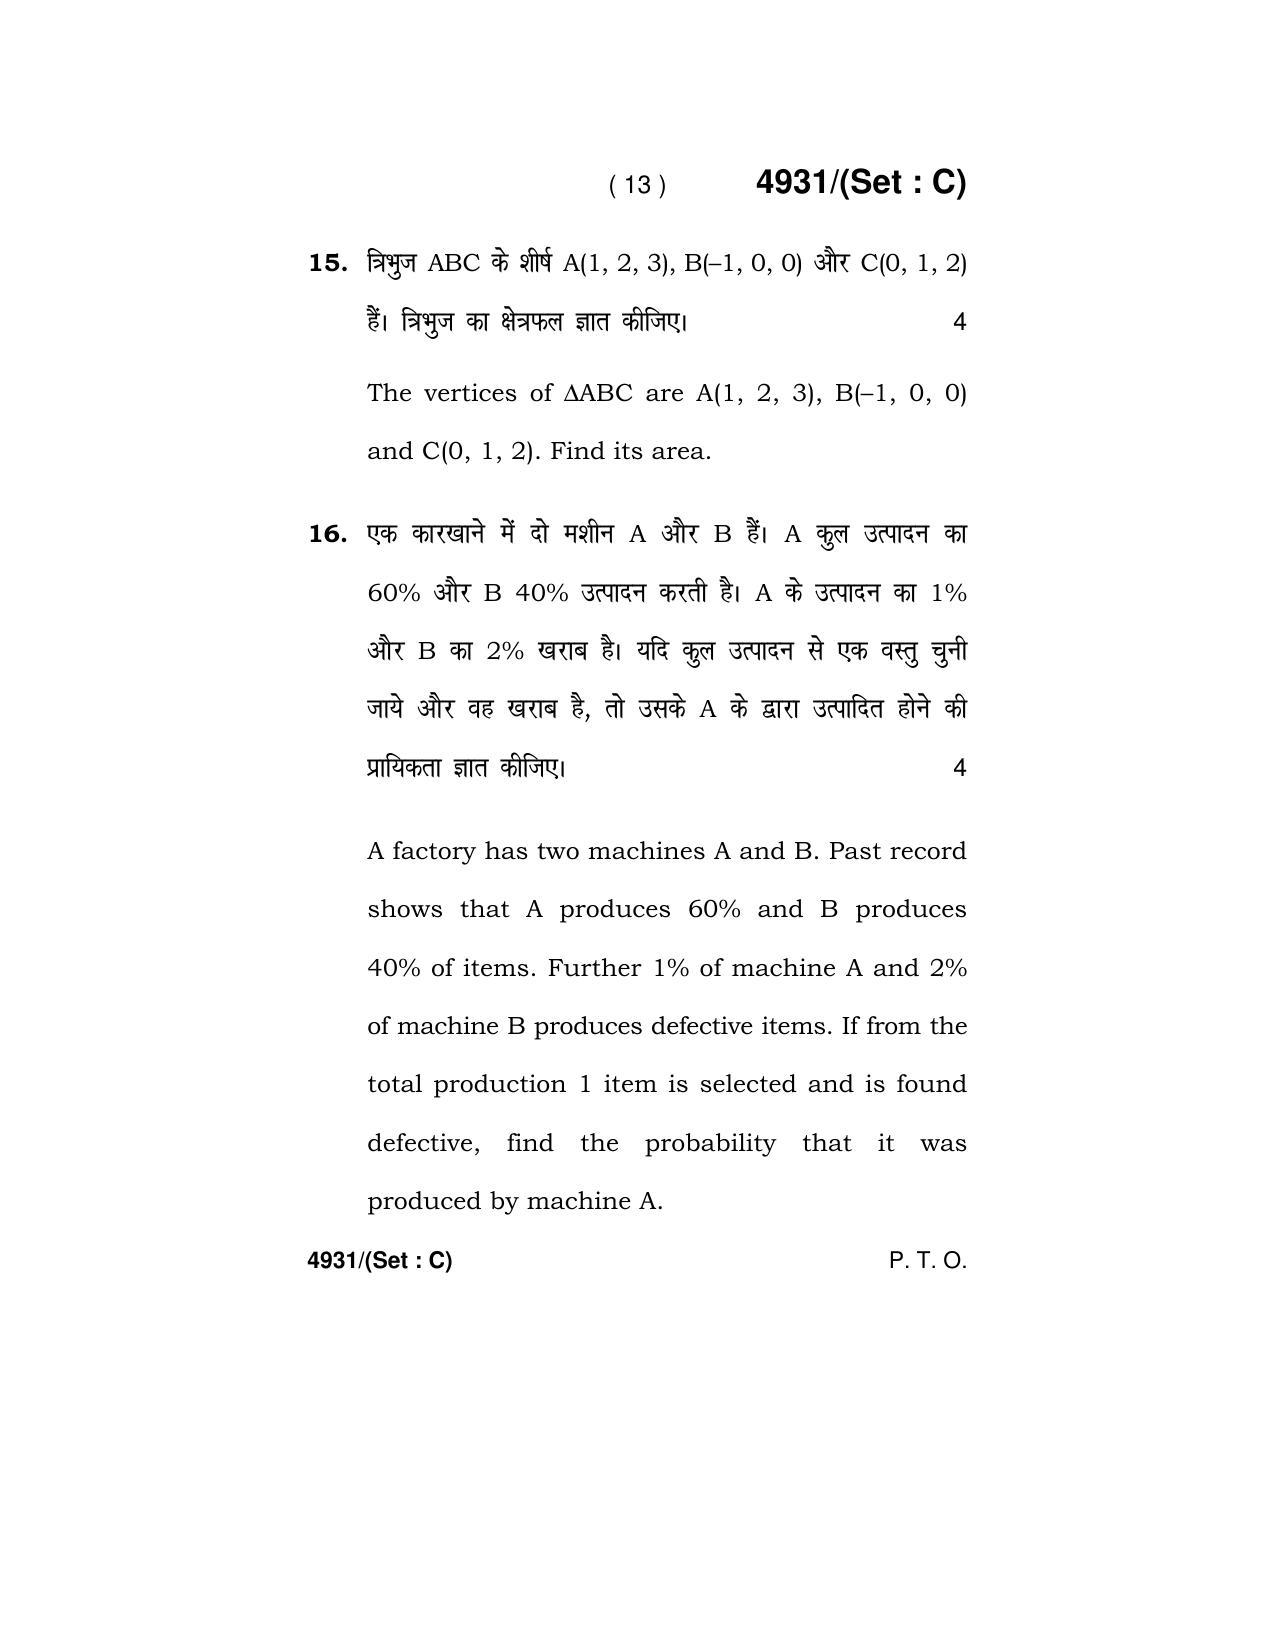 Haryana Board HBSE Class 12 Mathematics 2020 Question Paper - Page 45